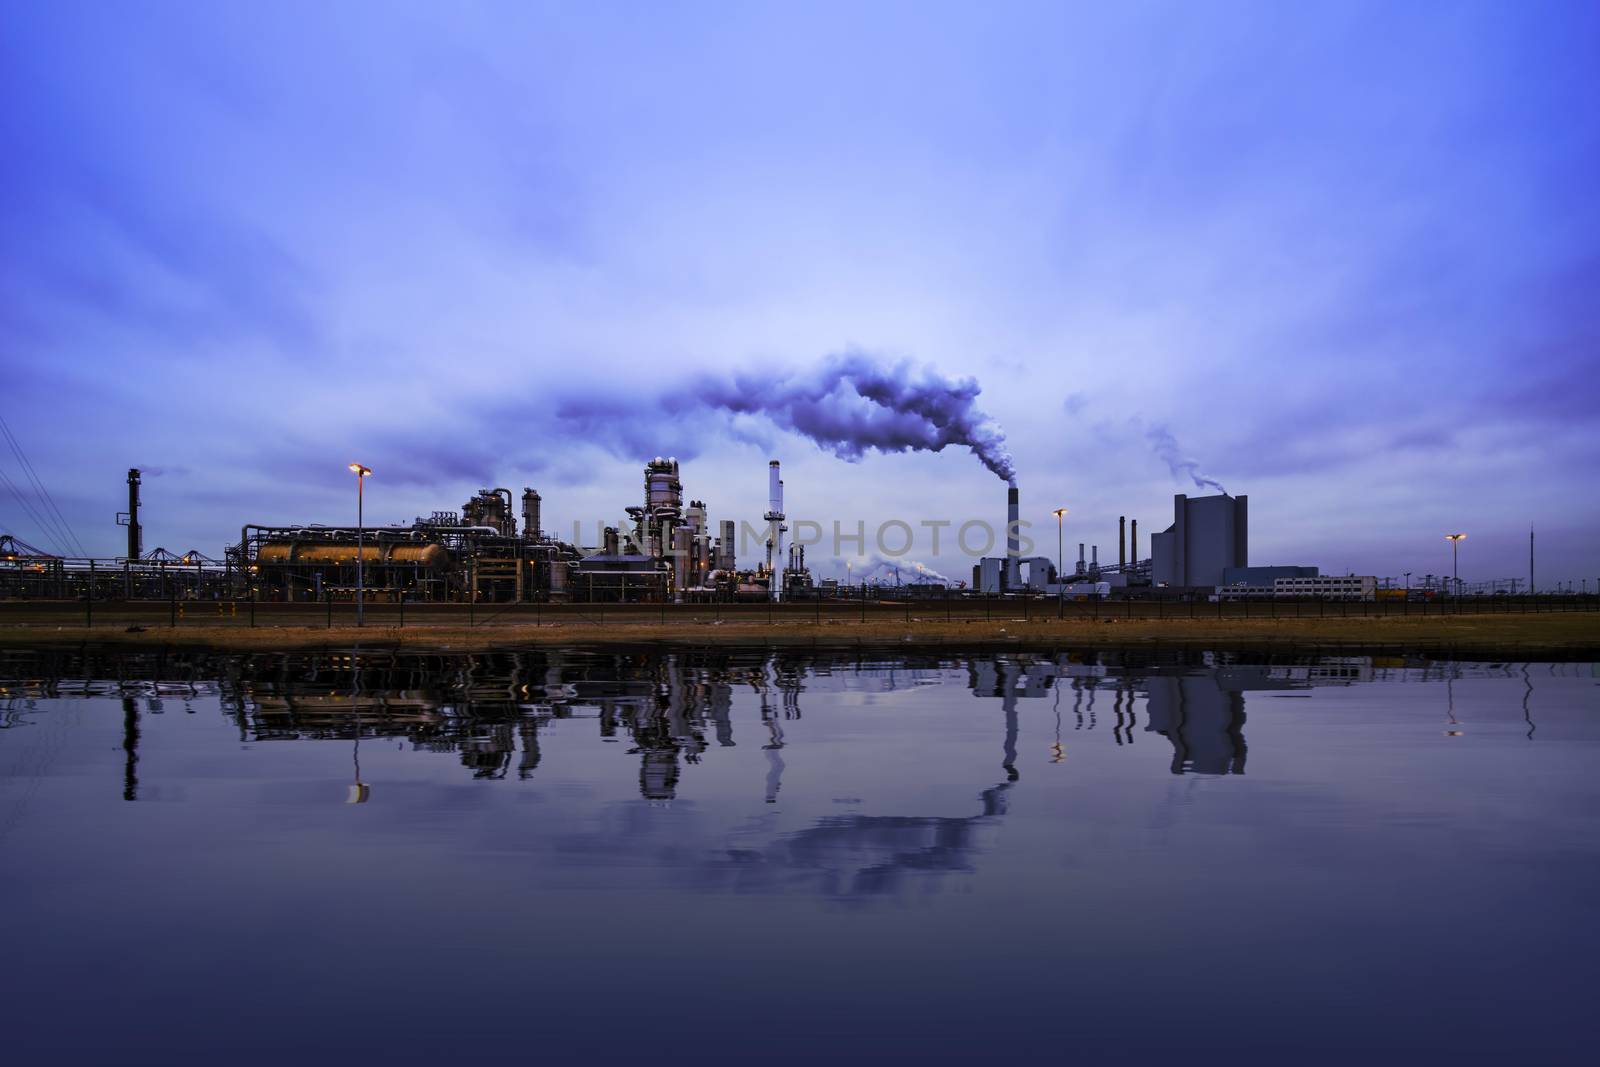 Reflection of refineries and its chimney during the on blue sunset hour moment at Rotterdam, Netherlands